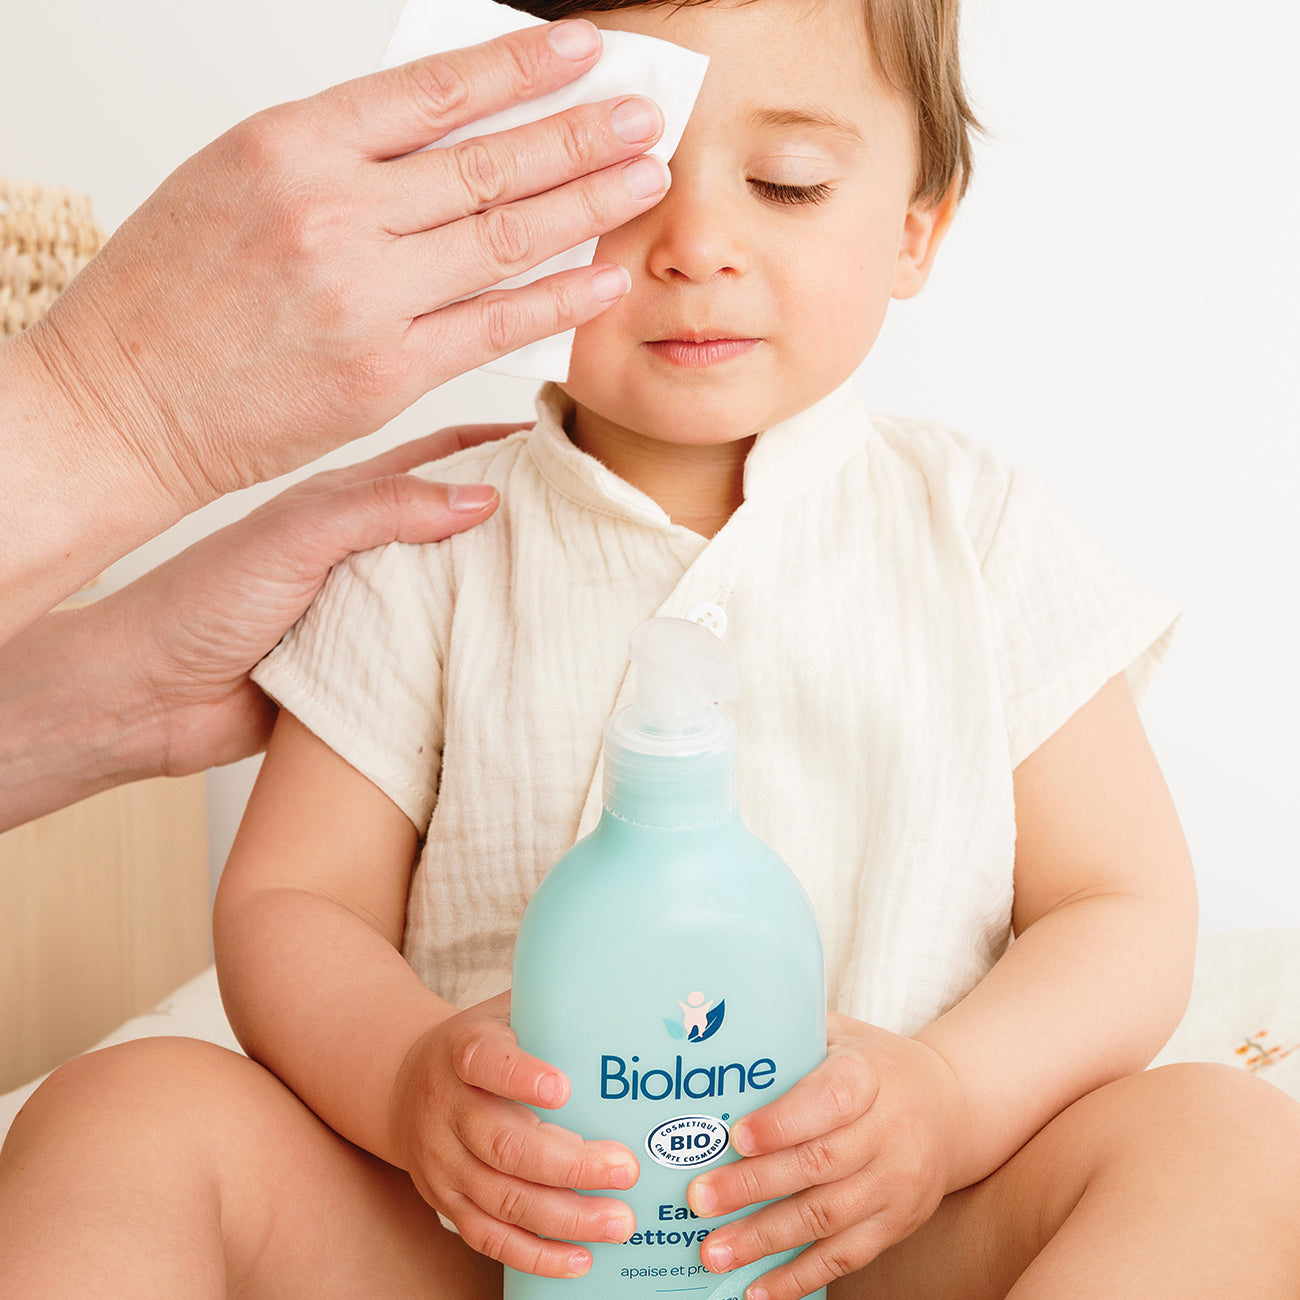 Get trendy with Eau nettoyante Certifiée biologique - Gel nettoyant available at BABY PREMA. Grab yours for €7.50 today!